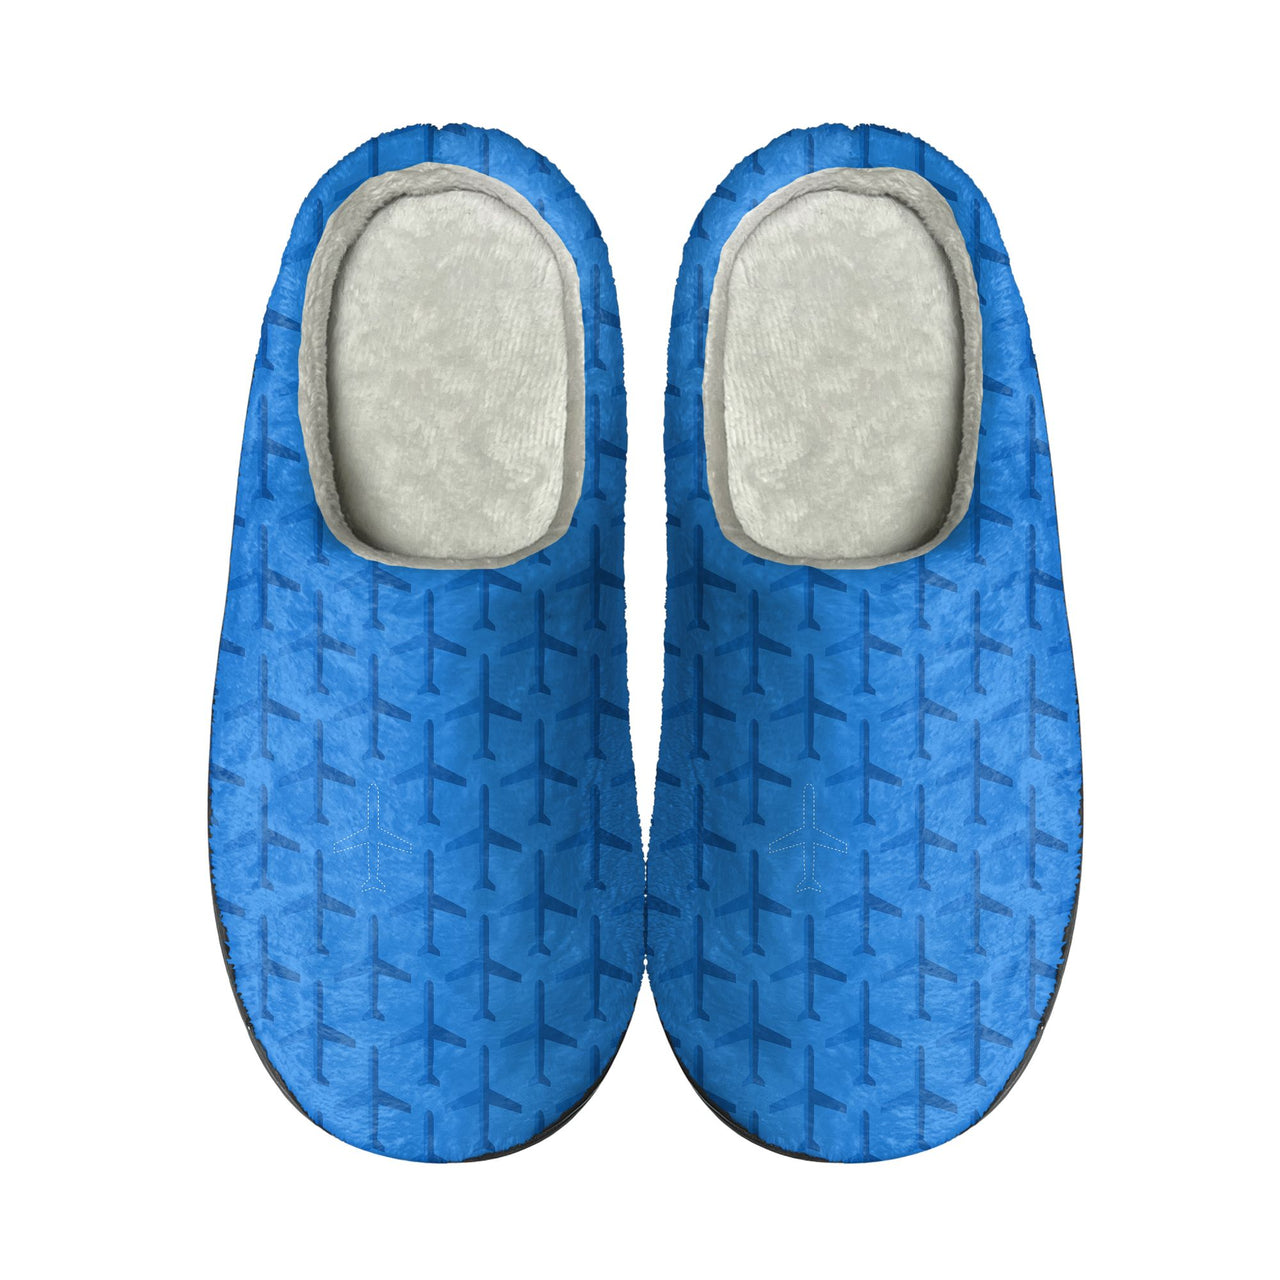 Blue Seamless Airplanes Designed Cotton Slippers